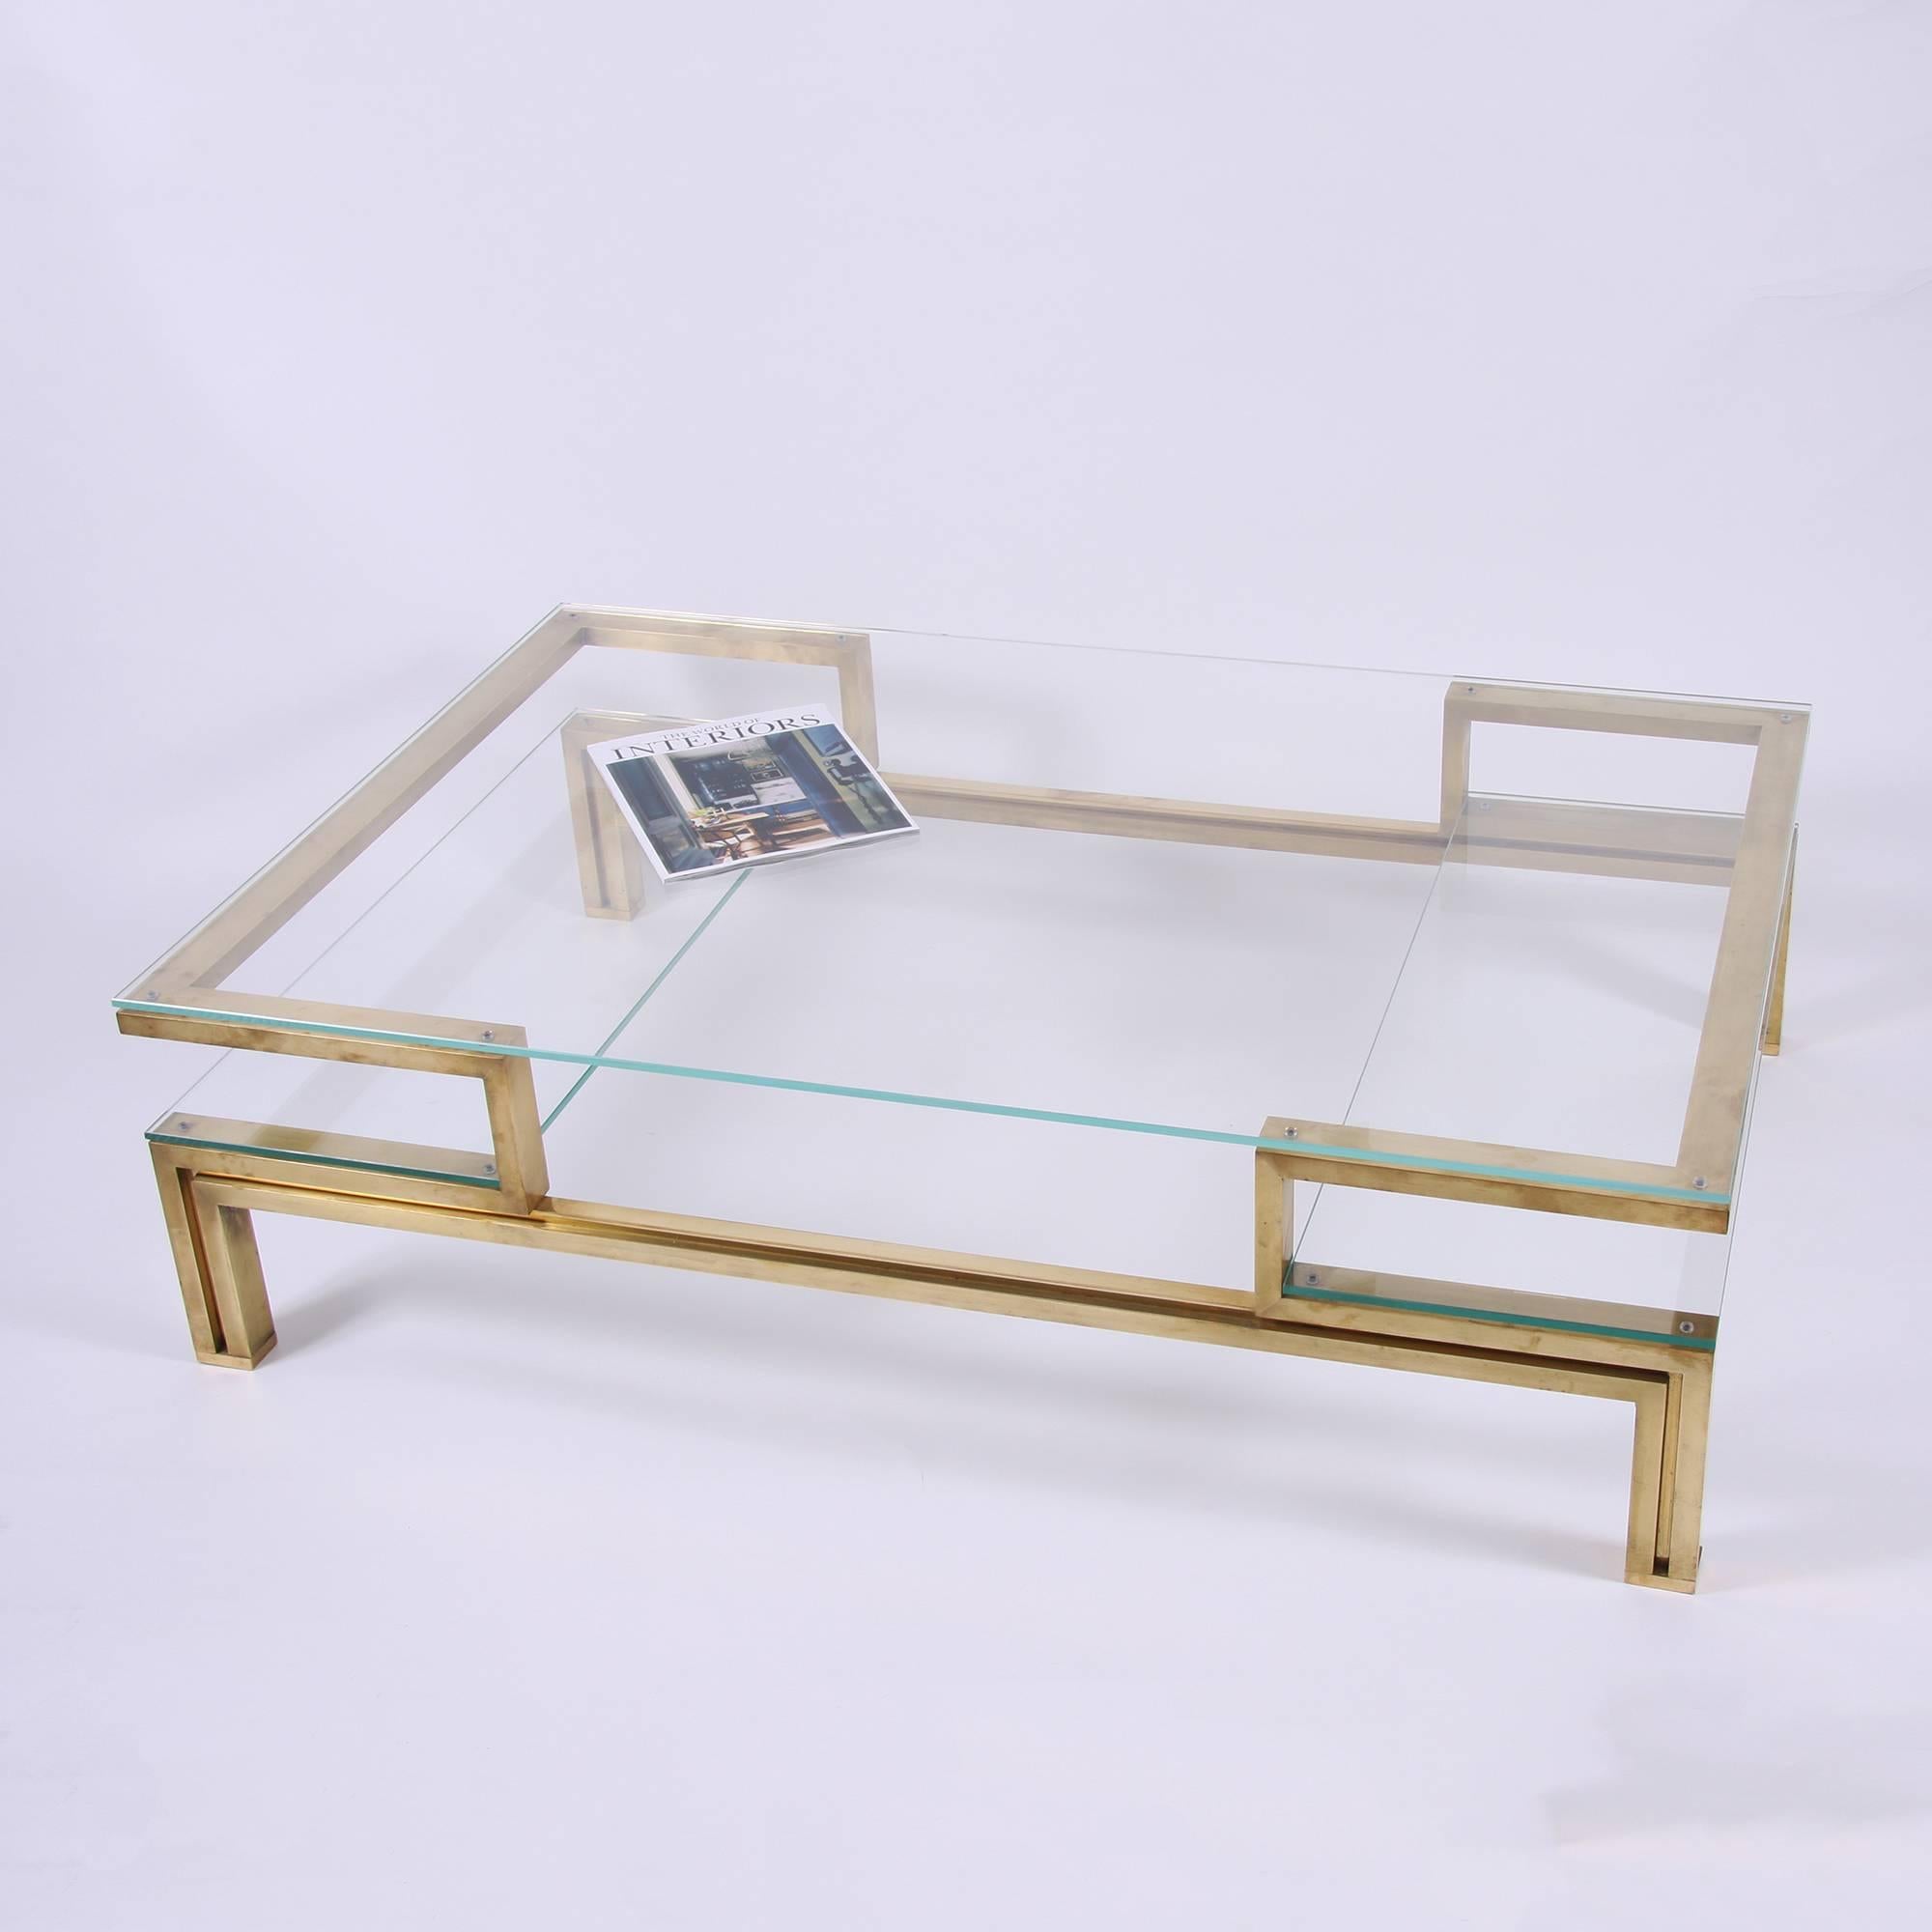 A fantastic quality French brass coffee table with two side 'shelves' for display or magazines. This table has a fabulous design. With new toughened glass.